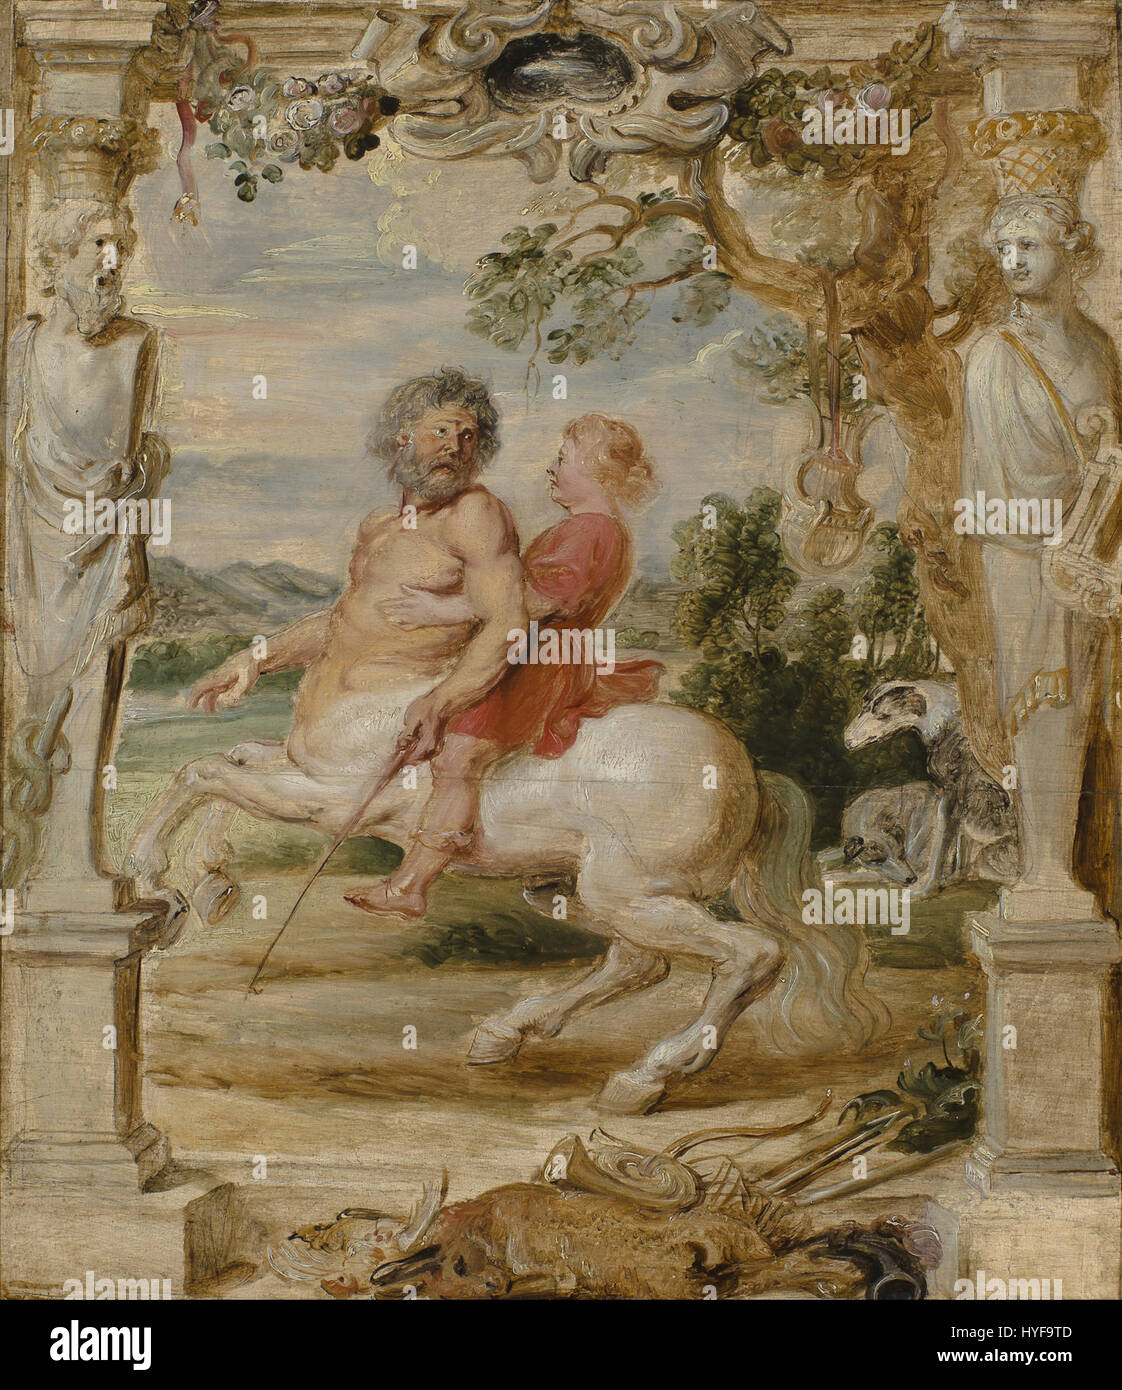 Peter Paul Rubens   Achilles Educated by the Centaur Chiron   Google Art Project Stock Photo